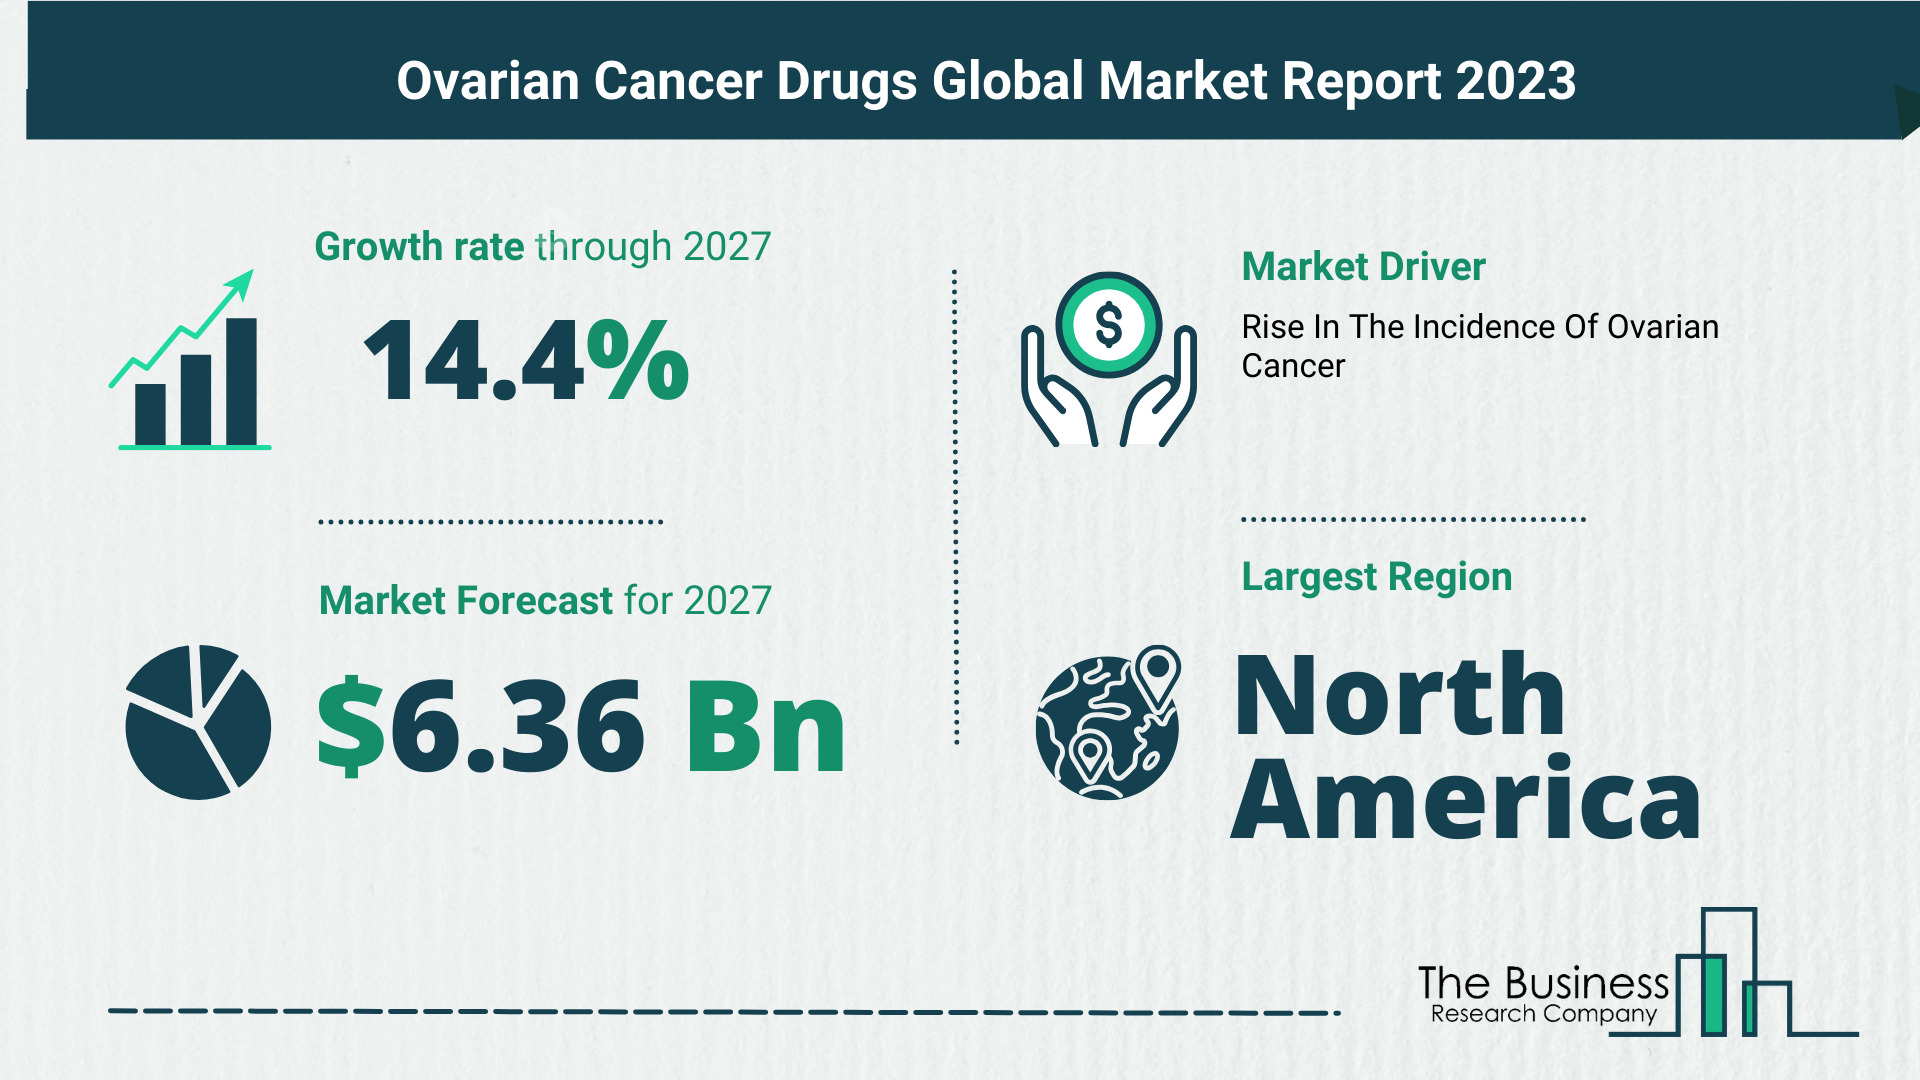 5 Key Insights On The Ovarian Cancer Drugs Market 2023